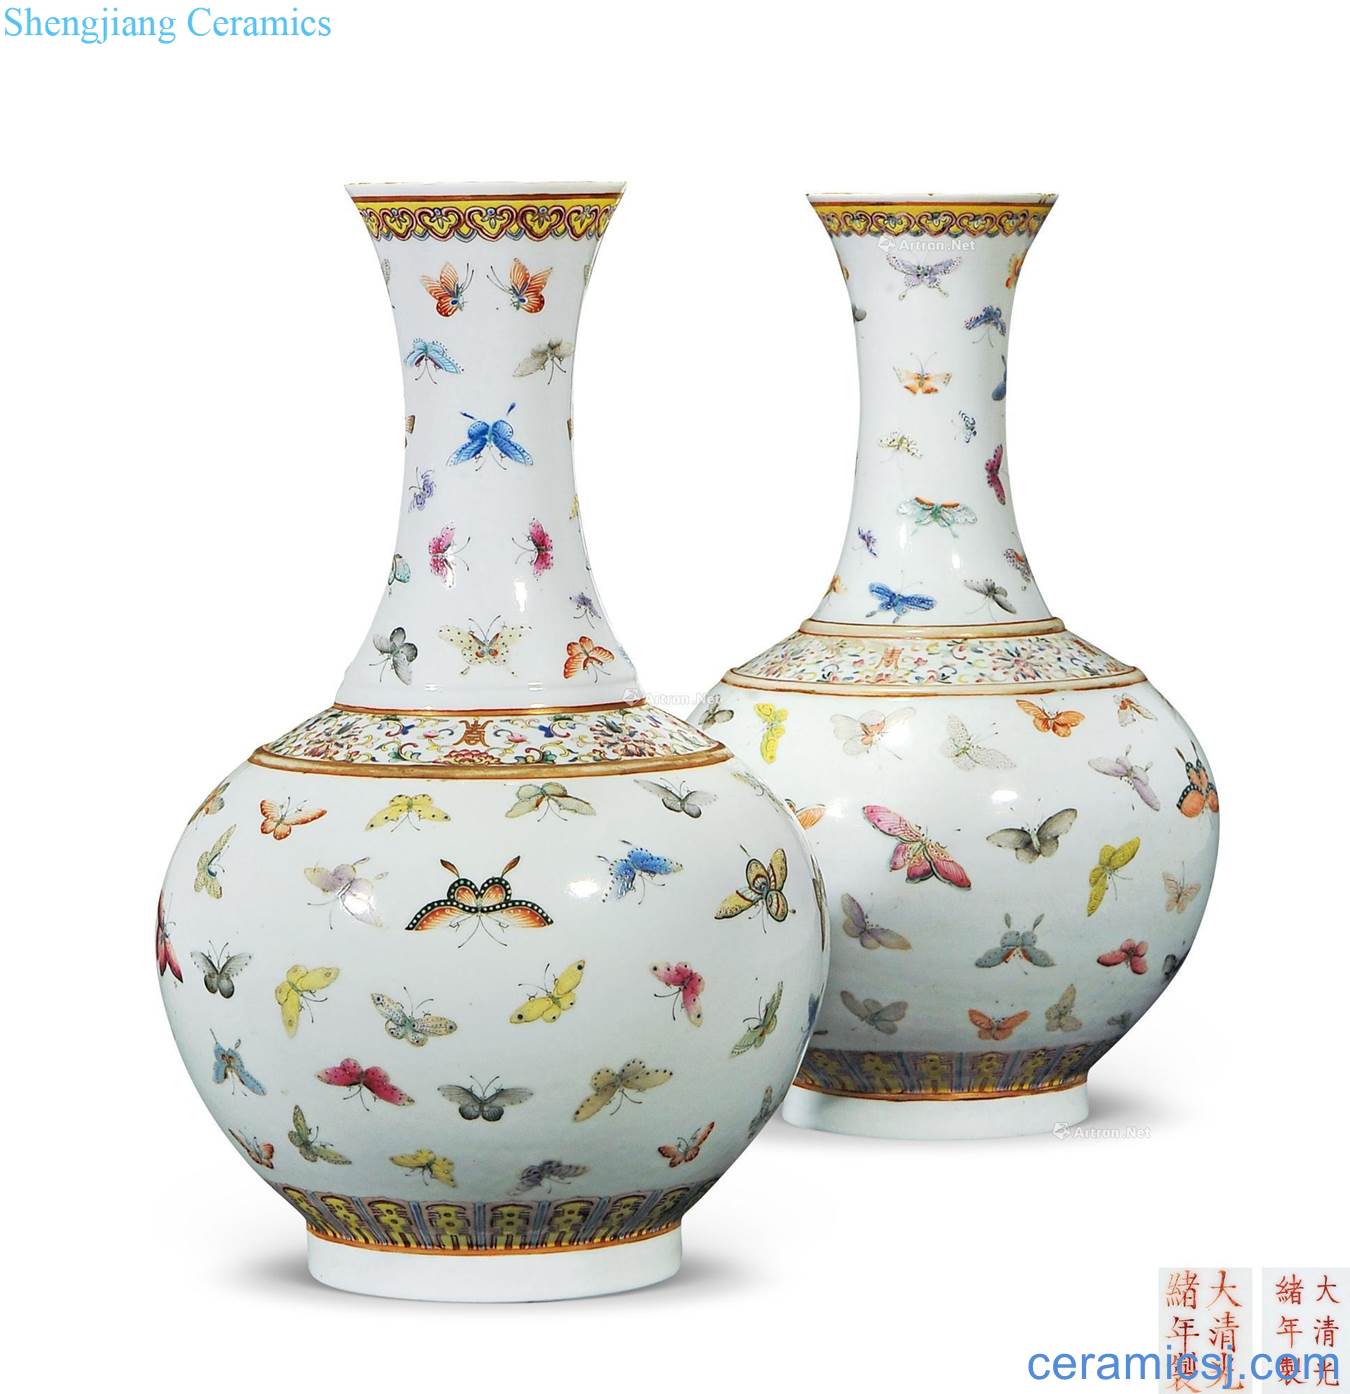 Pastel reign of qing emperor guangxu the butterfly TuShang bottle (a)